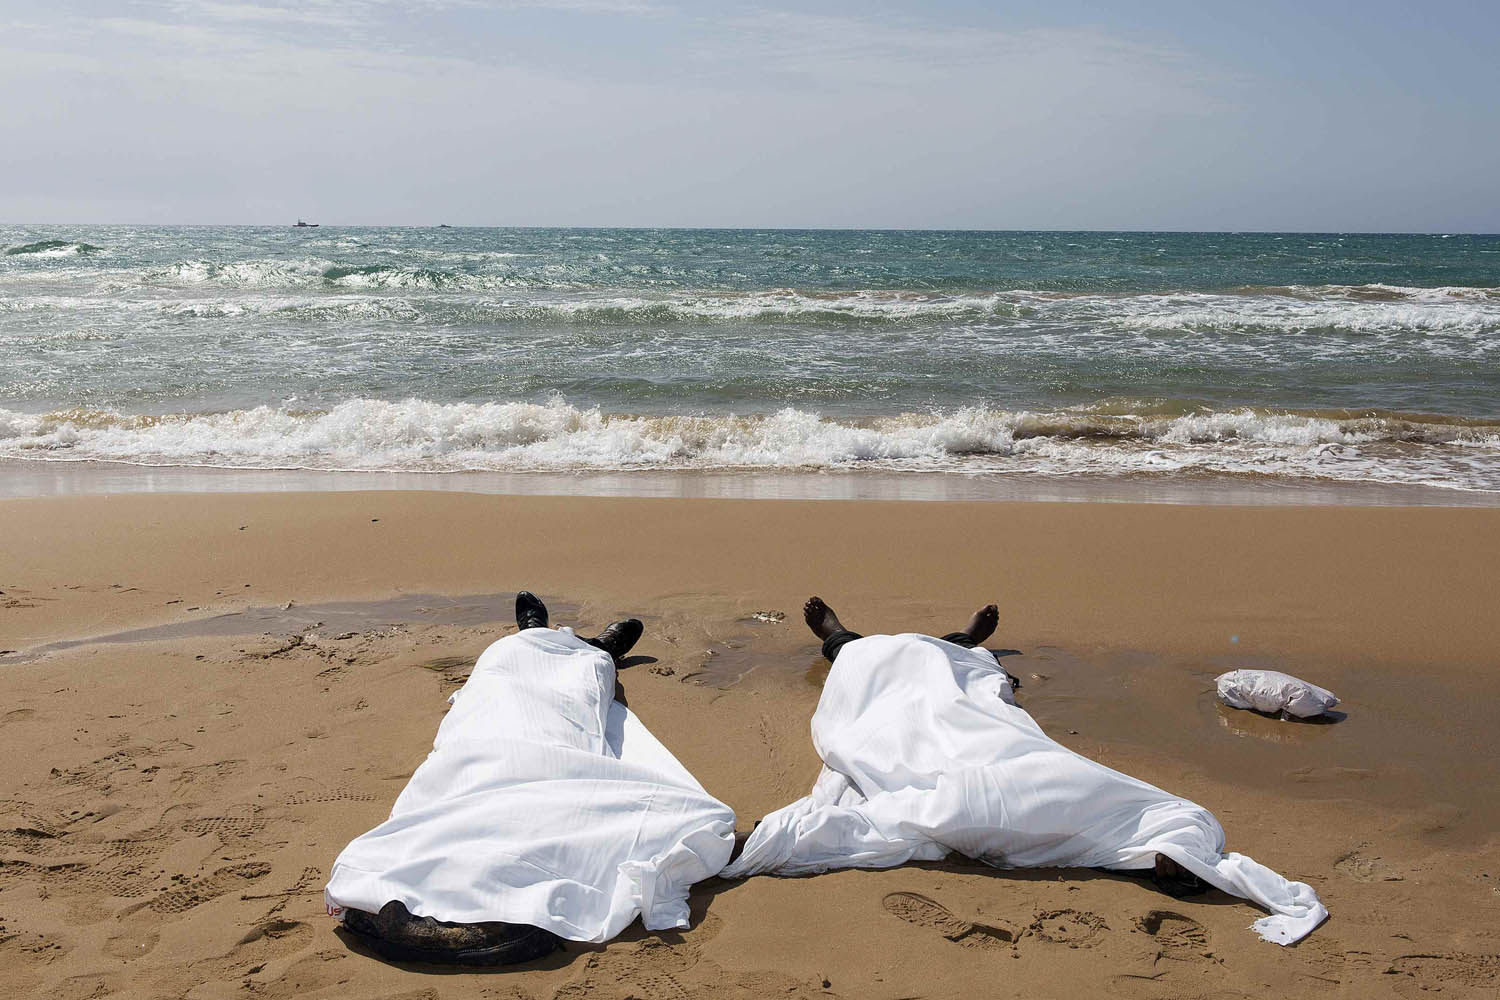 Sept. 30, 2013. Bodies of migrants who drowned lie on the beach in the Sicilian village of Sampieri.